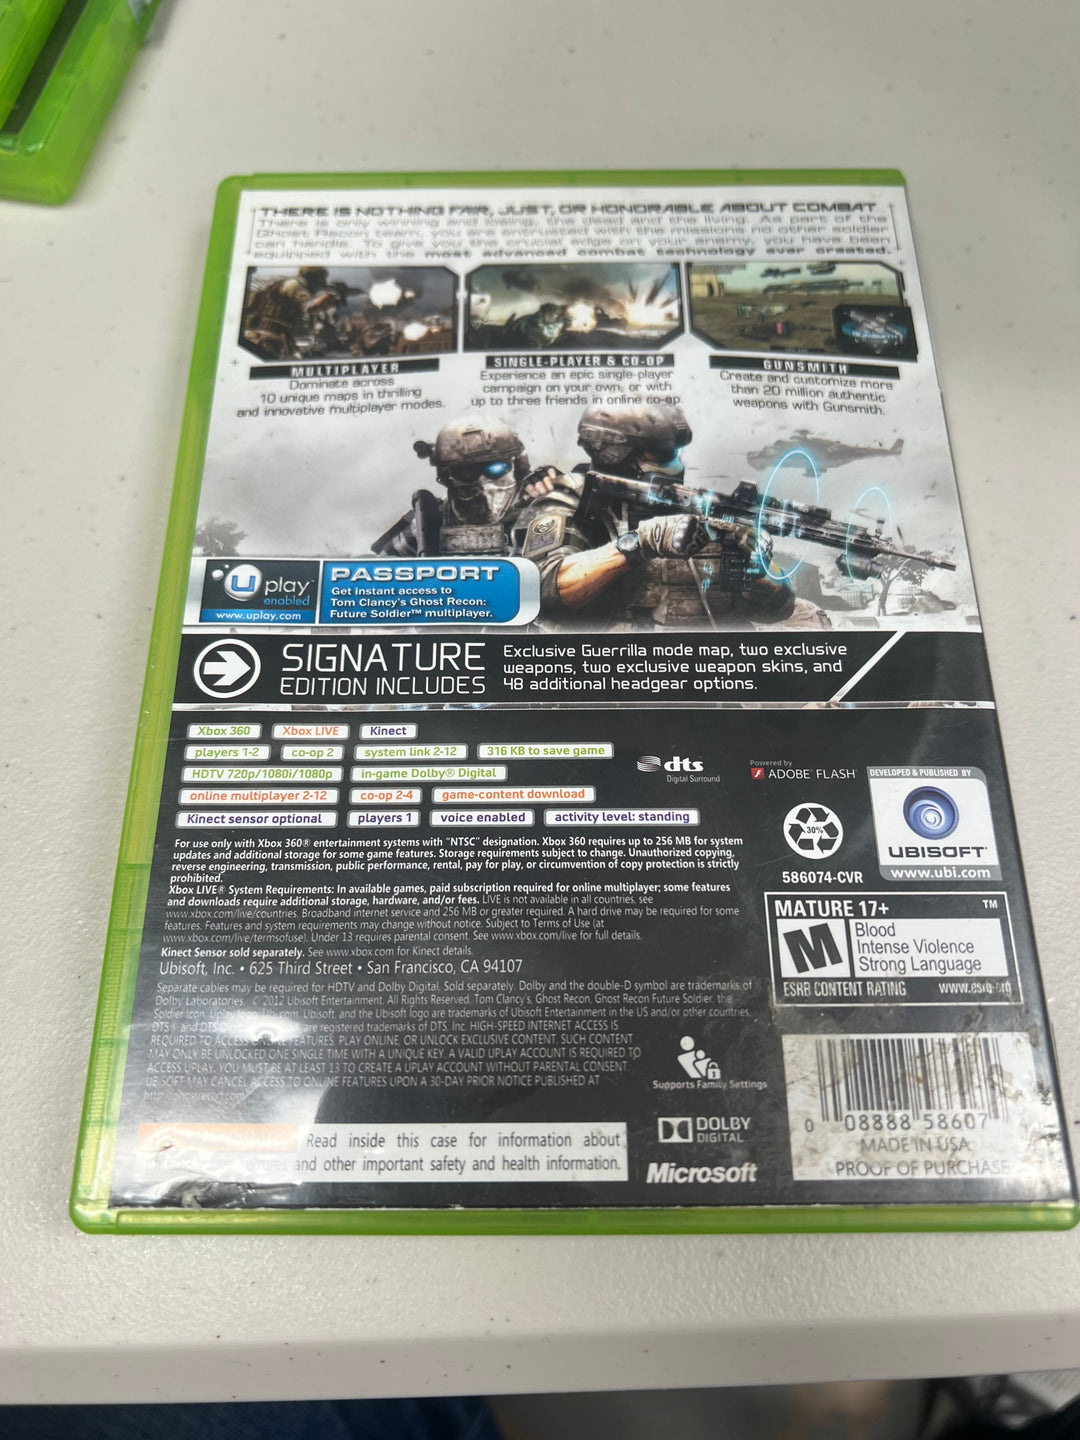 Tom Clancy's Ghost Recon Future Solider for Microsoft Xbox 360 in case. Tested and working.     DO61024